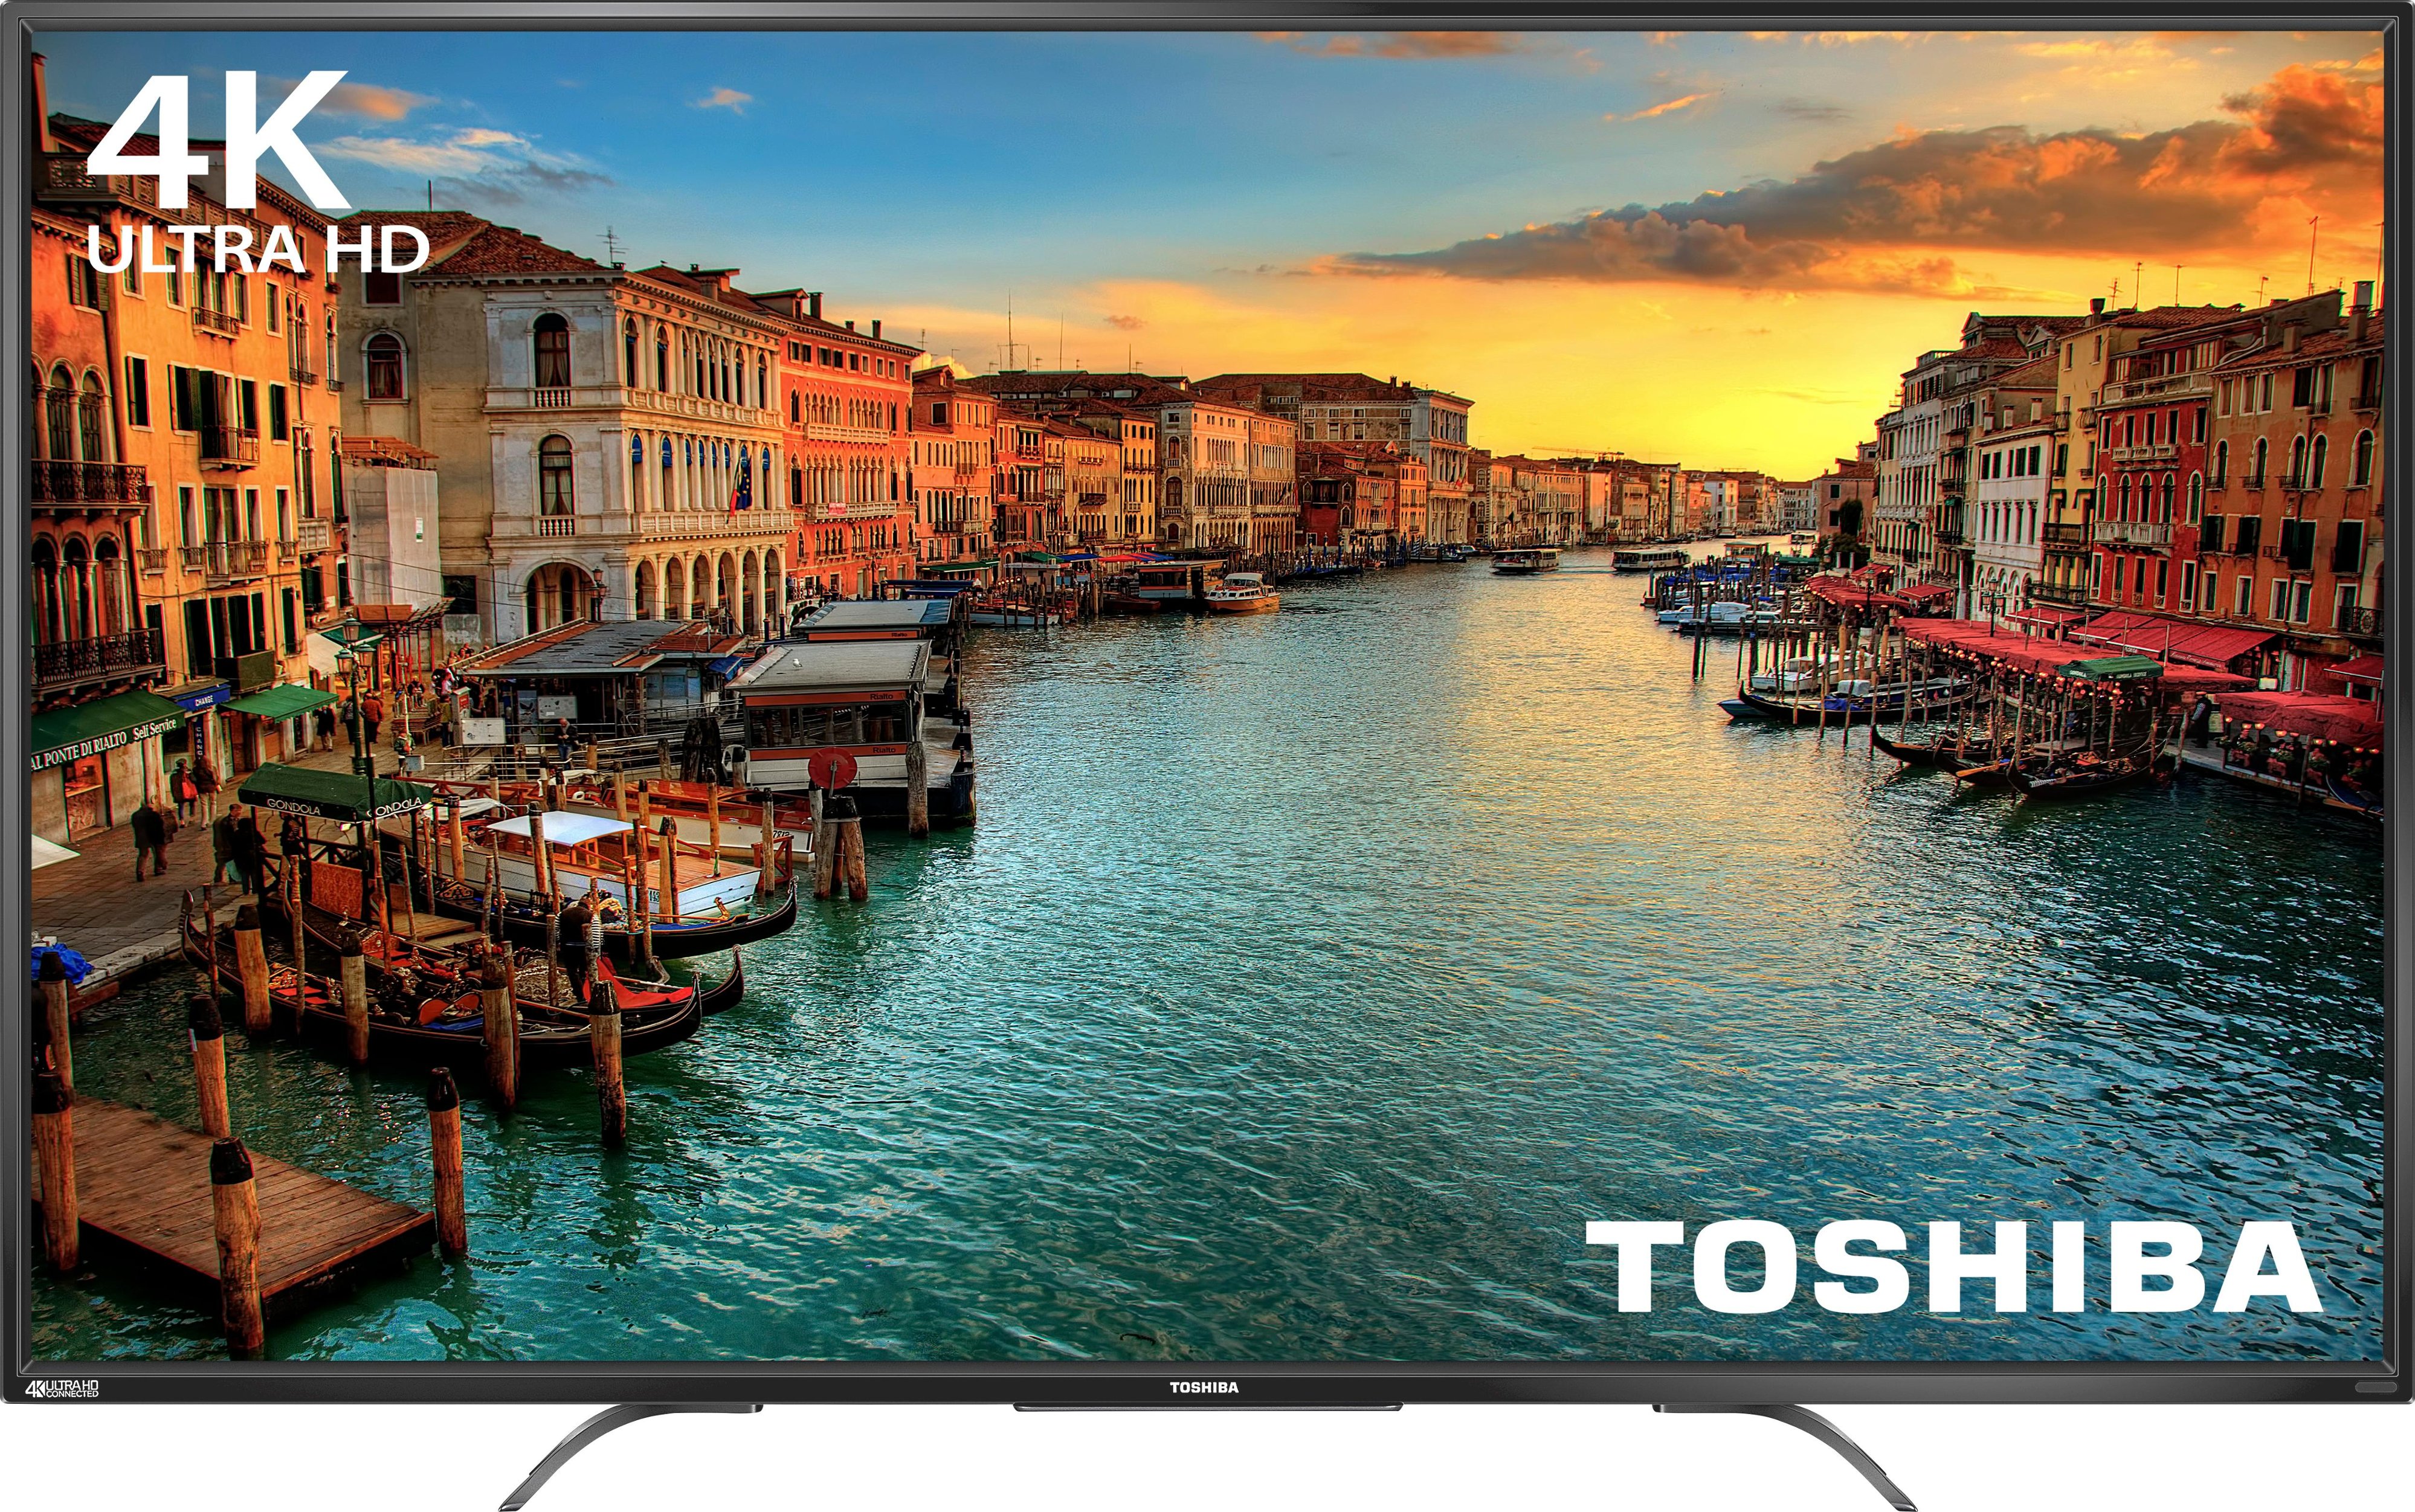 Toshiba 55" Class 2160p with Chromecast 4K UHD TV with HDR 55L711U18 - Best Buy